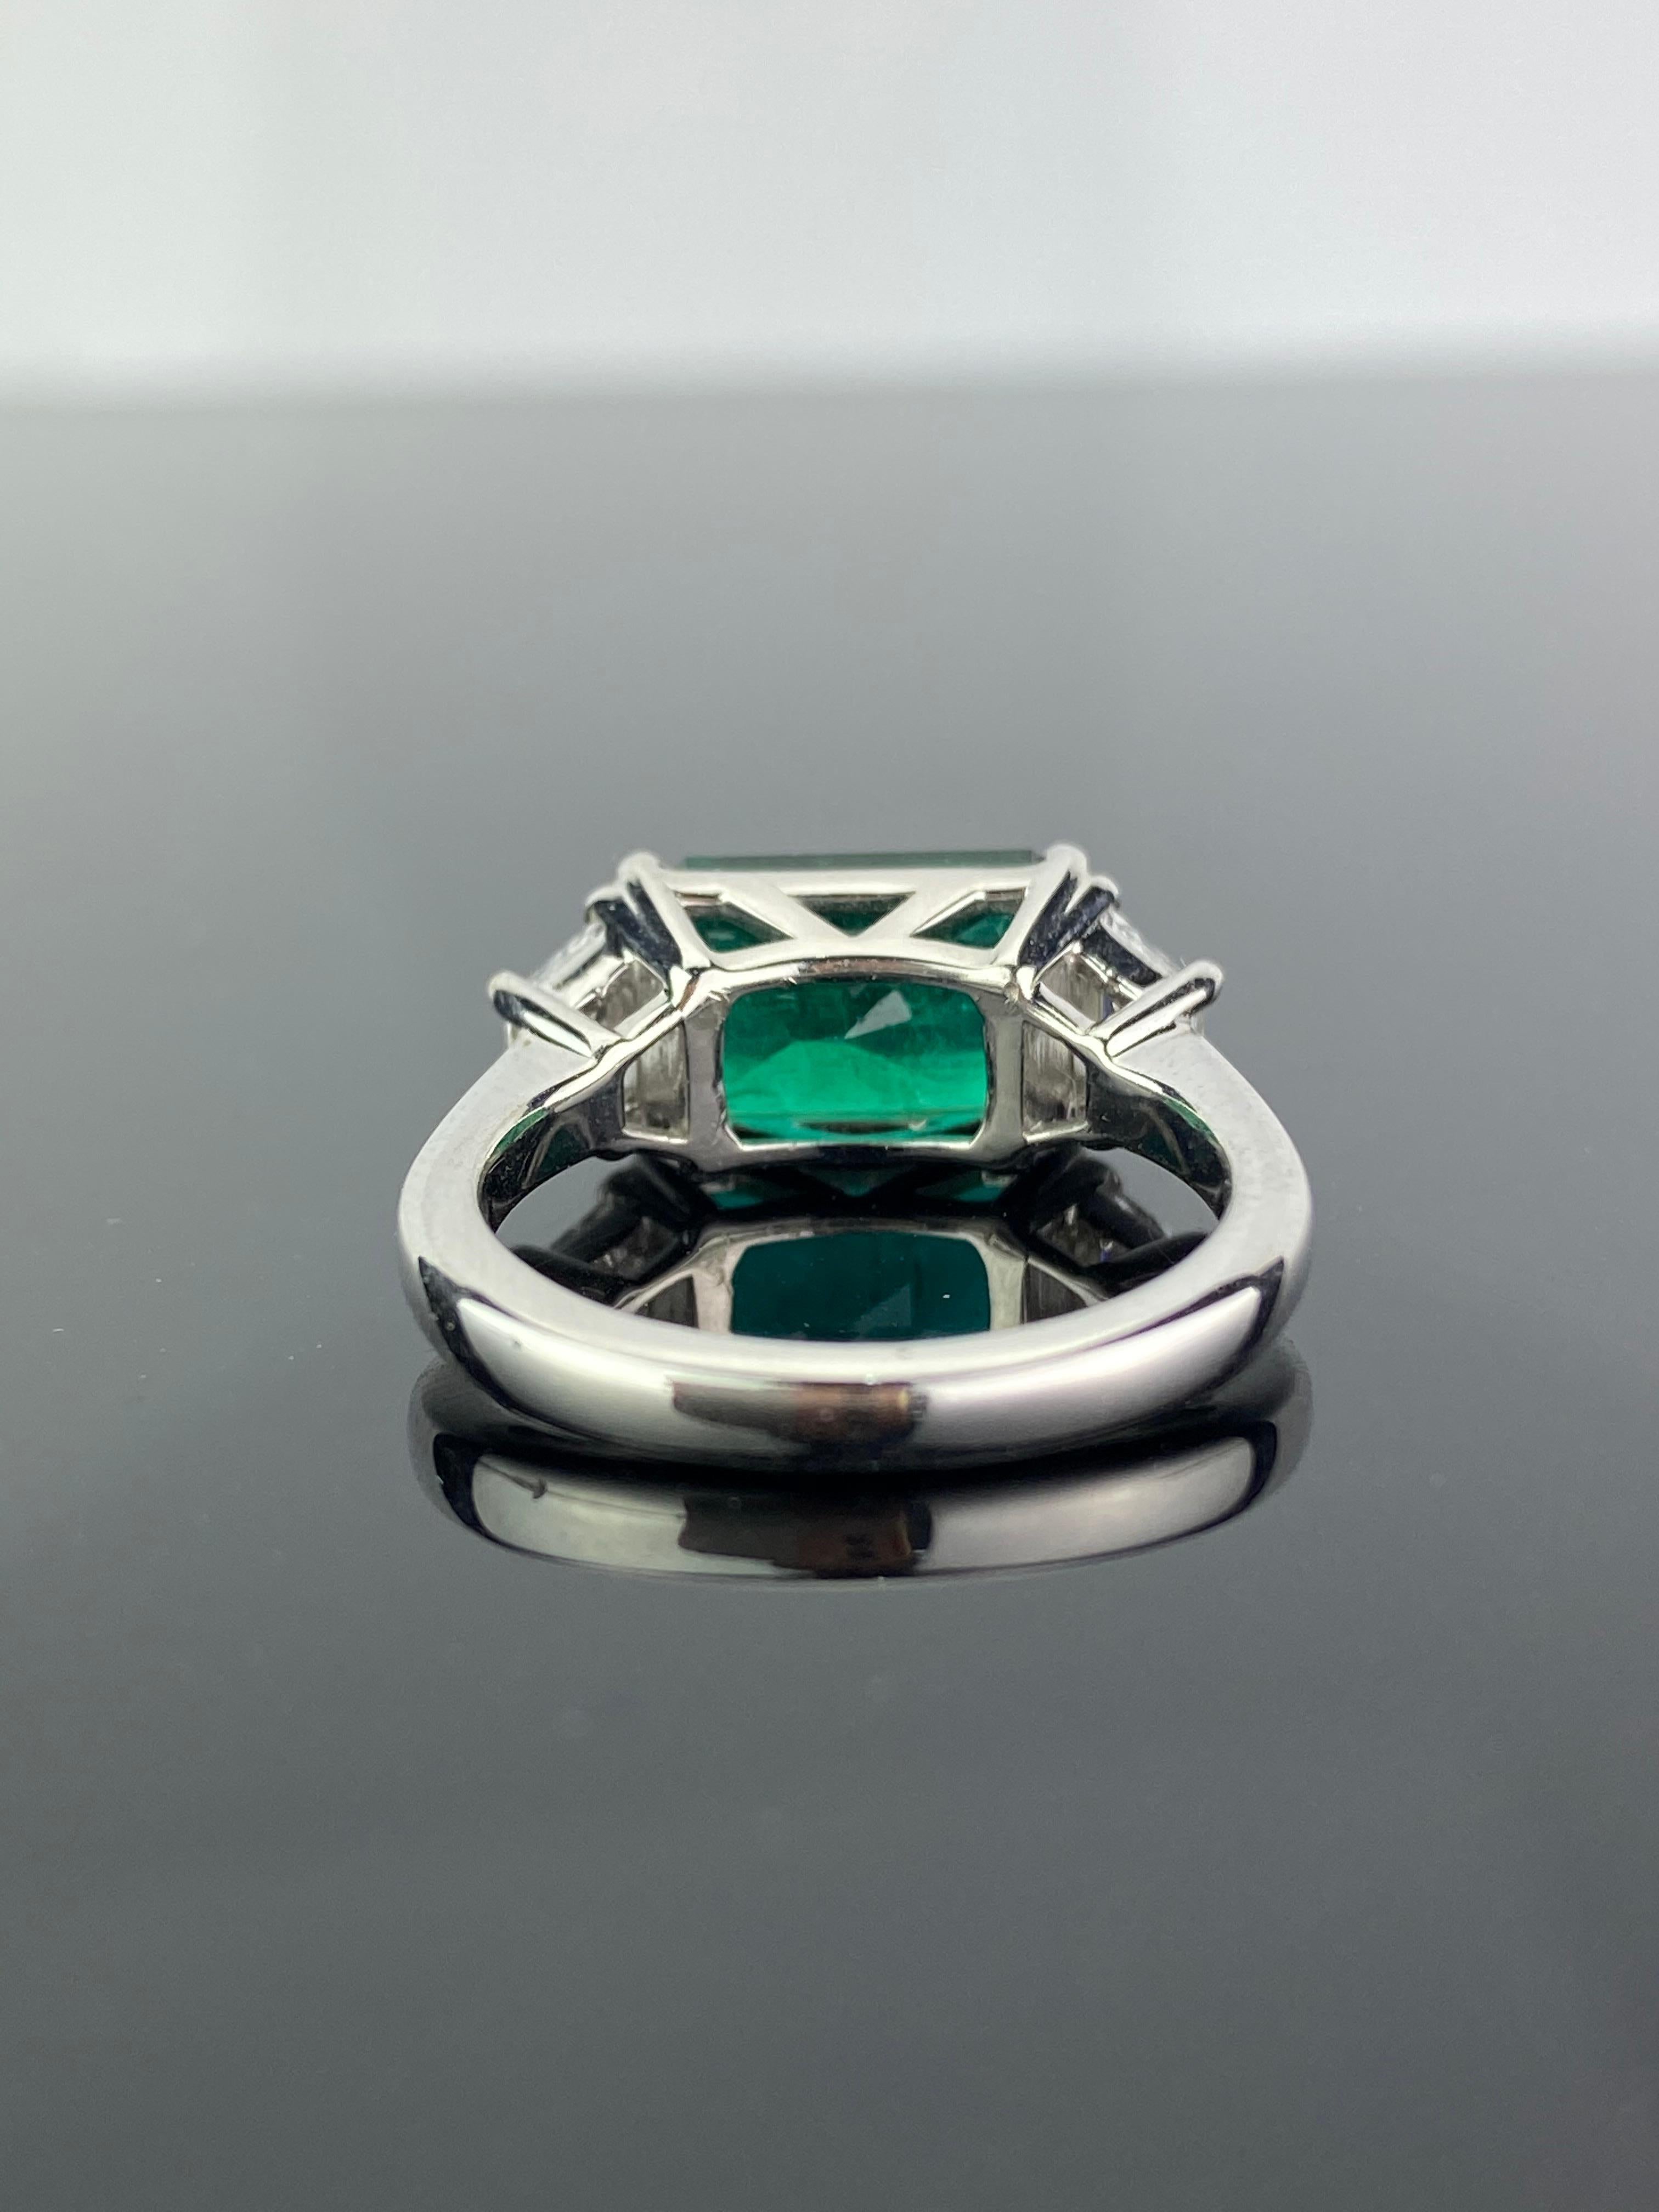 A stunning 3.42 carat emerald cut Zambian Emerald and 0.44 carat VS quality, G color White Diamond three-stone engagement ring. The Emerald is transparent, with very few naturally occurring inclusions. The cut of the stone is excellent, there is